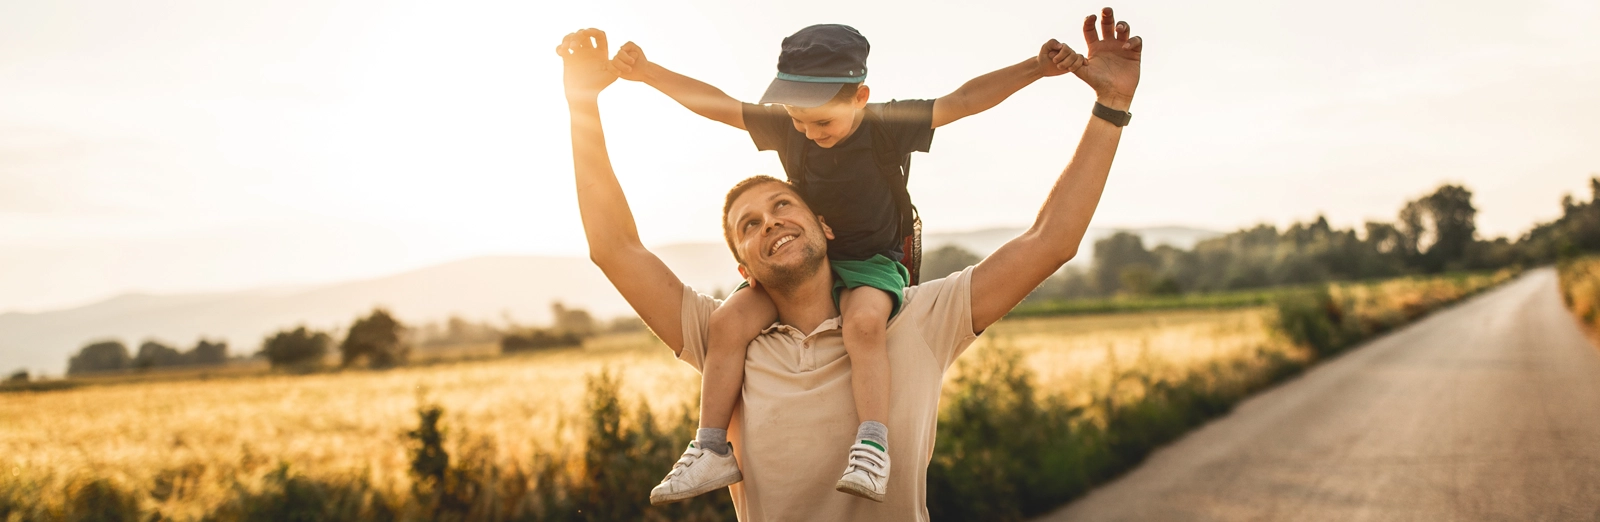 son-sitting-on-fathers-shoulders-1600x522.webp